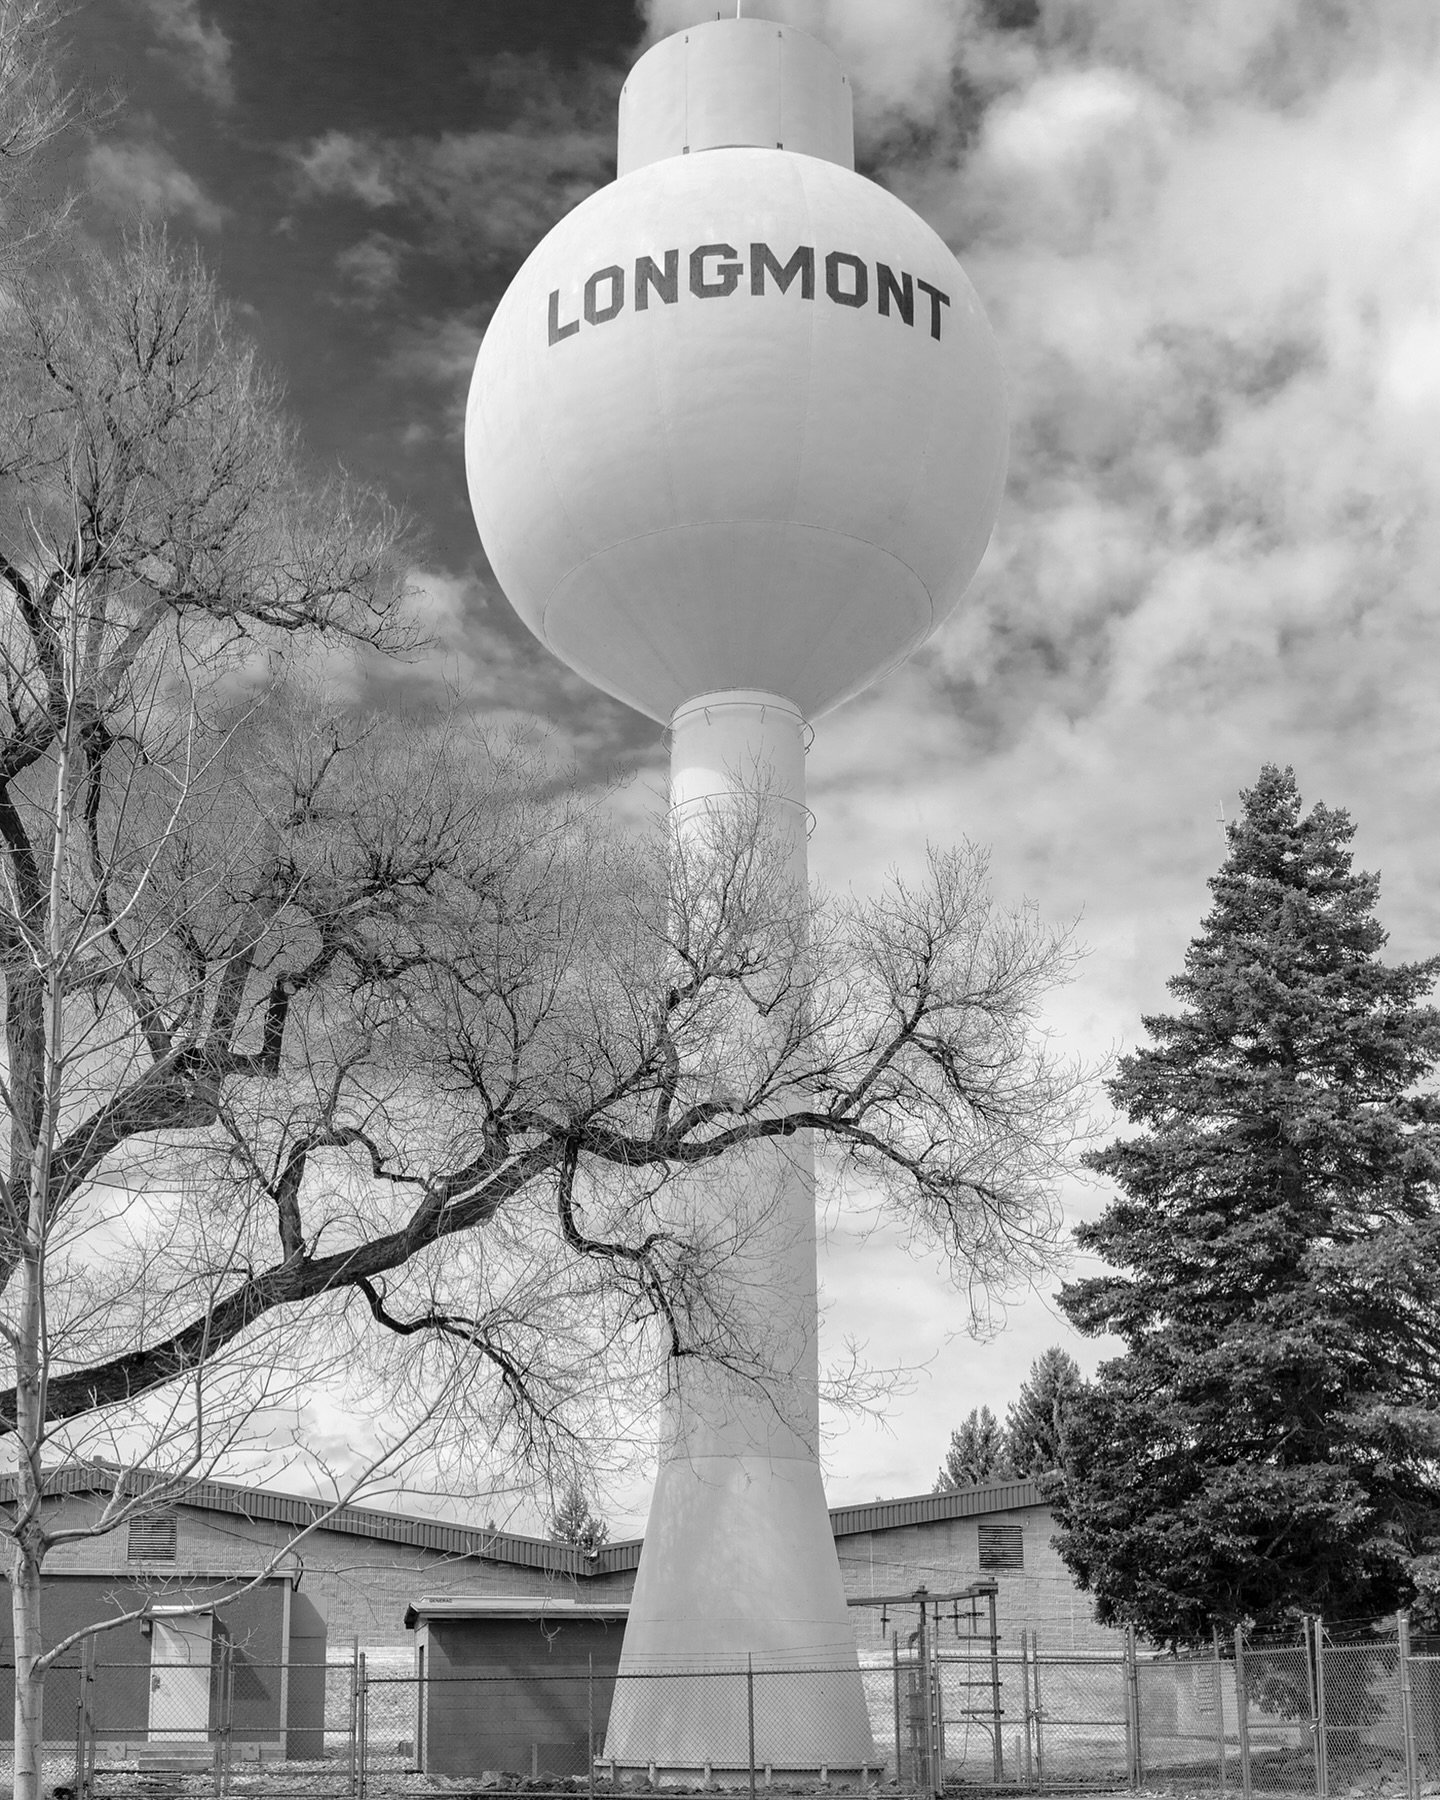 &ldquo;Good black and white photography is not about the removal of color.&rdquo;
~ Rob Sheppard

Longmont Water Tower!

I love how the trees frame the tower and the angles of the roofline in the background compliment the angular shape of the base. I